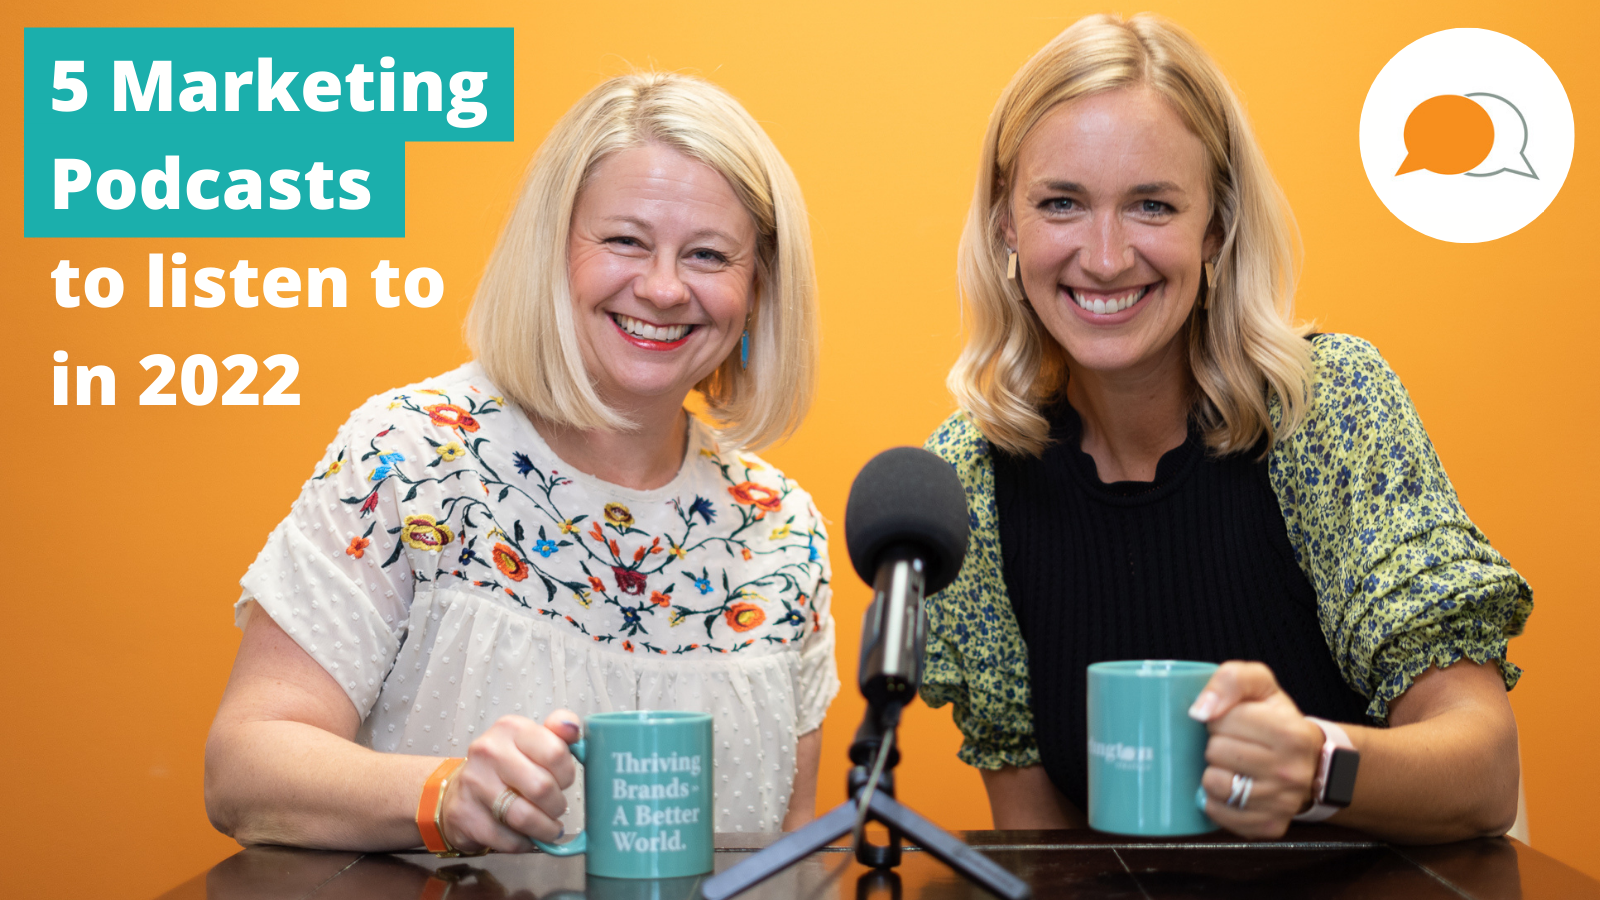 5 Marketing Podcasts to Listen to in 2022